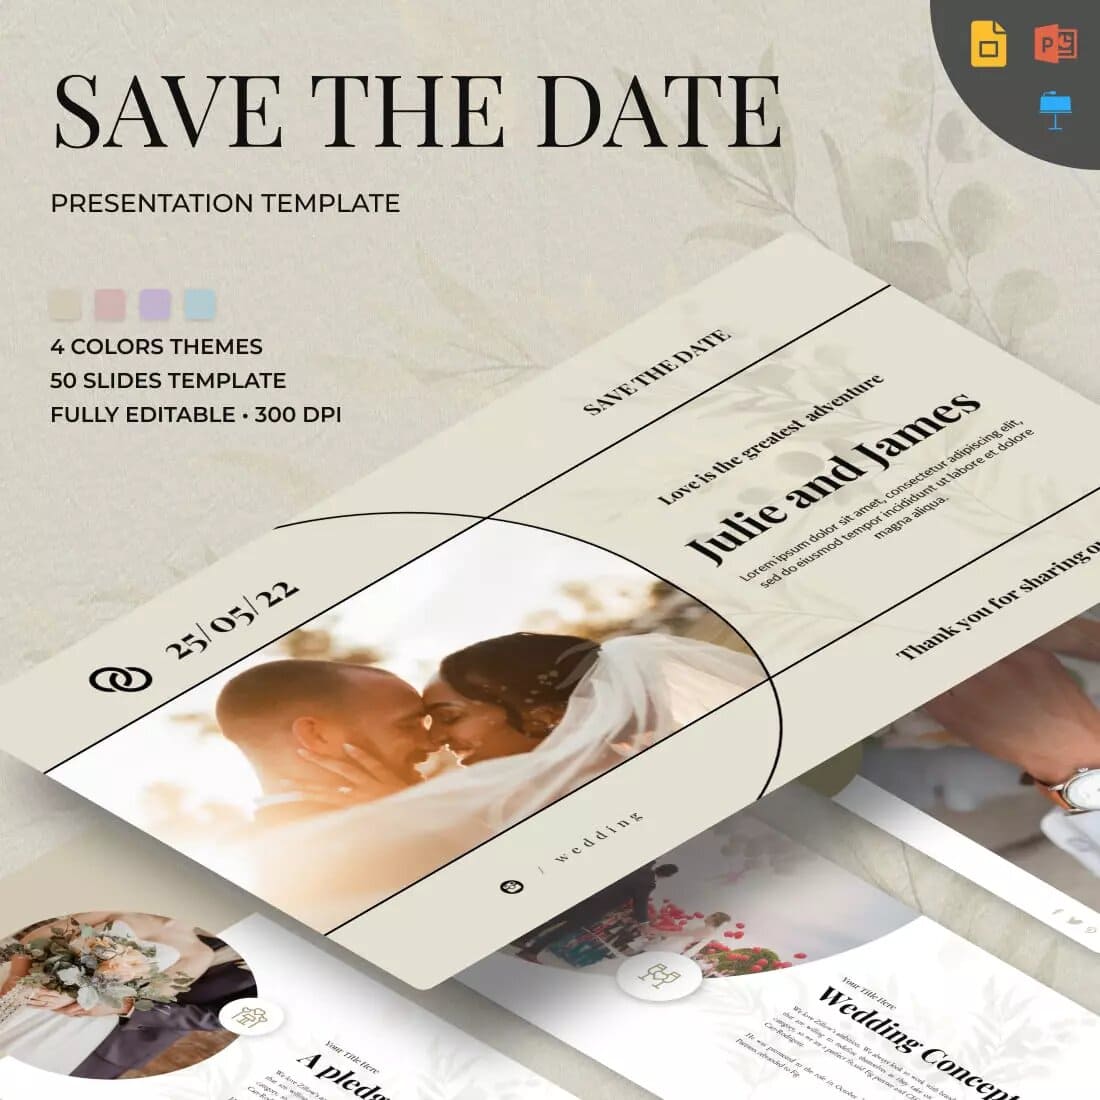 Save The Date Presentation Template Preview 1.